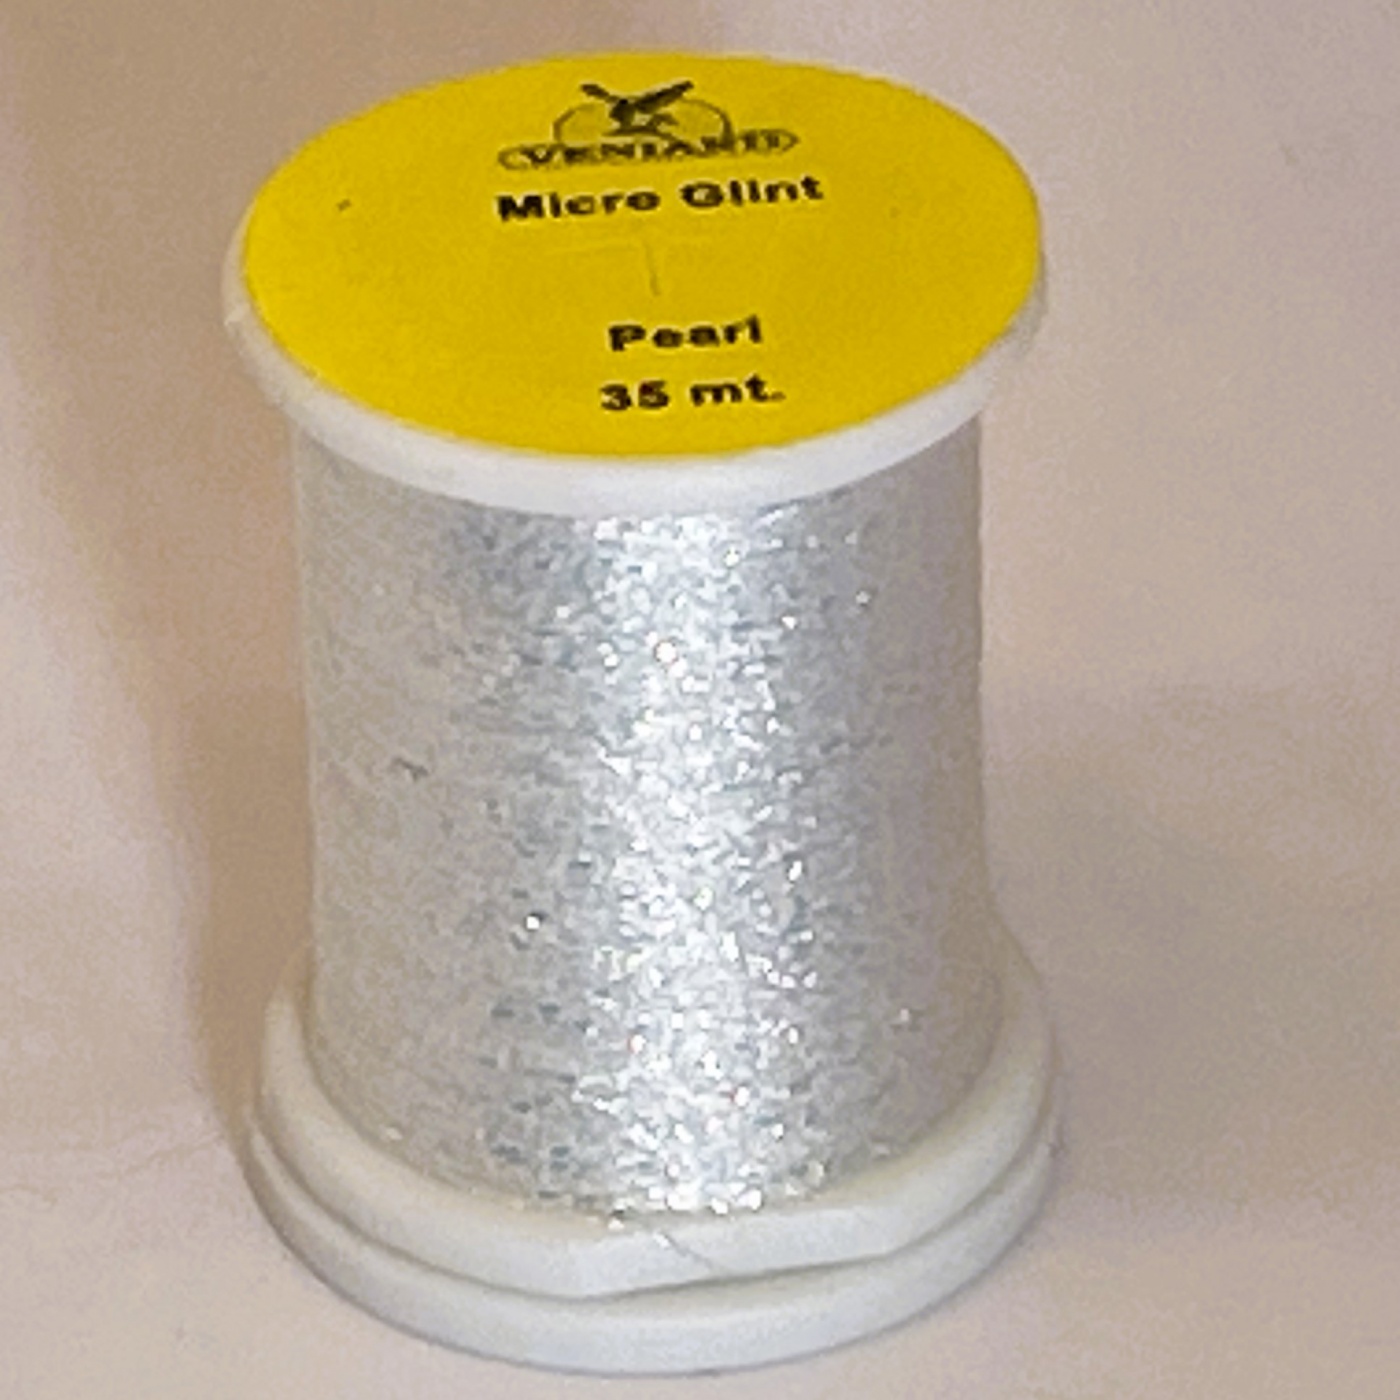 Veniard Micro Glint Pearl Fly Tying Materials (Product Length 38.27 Yds / 35m)